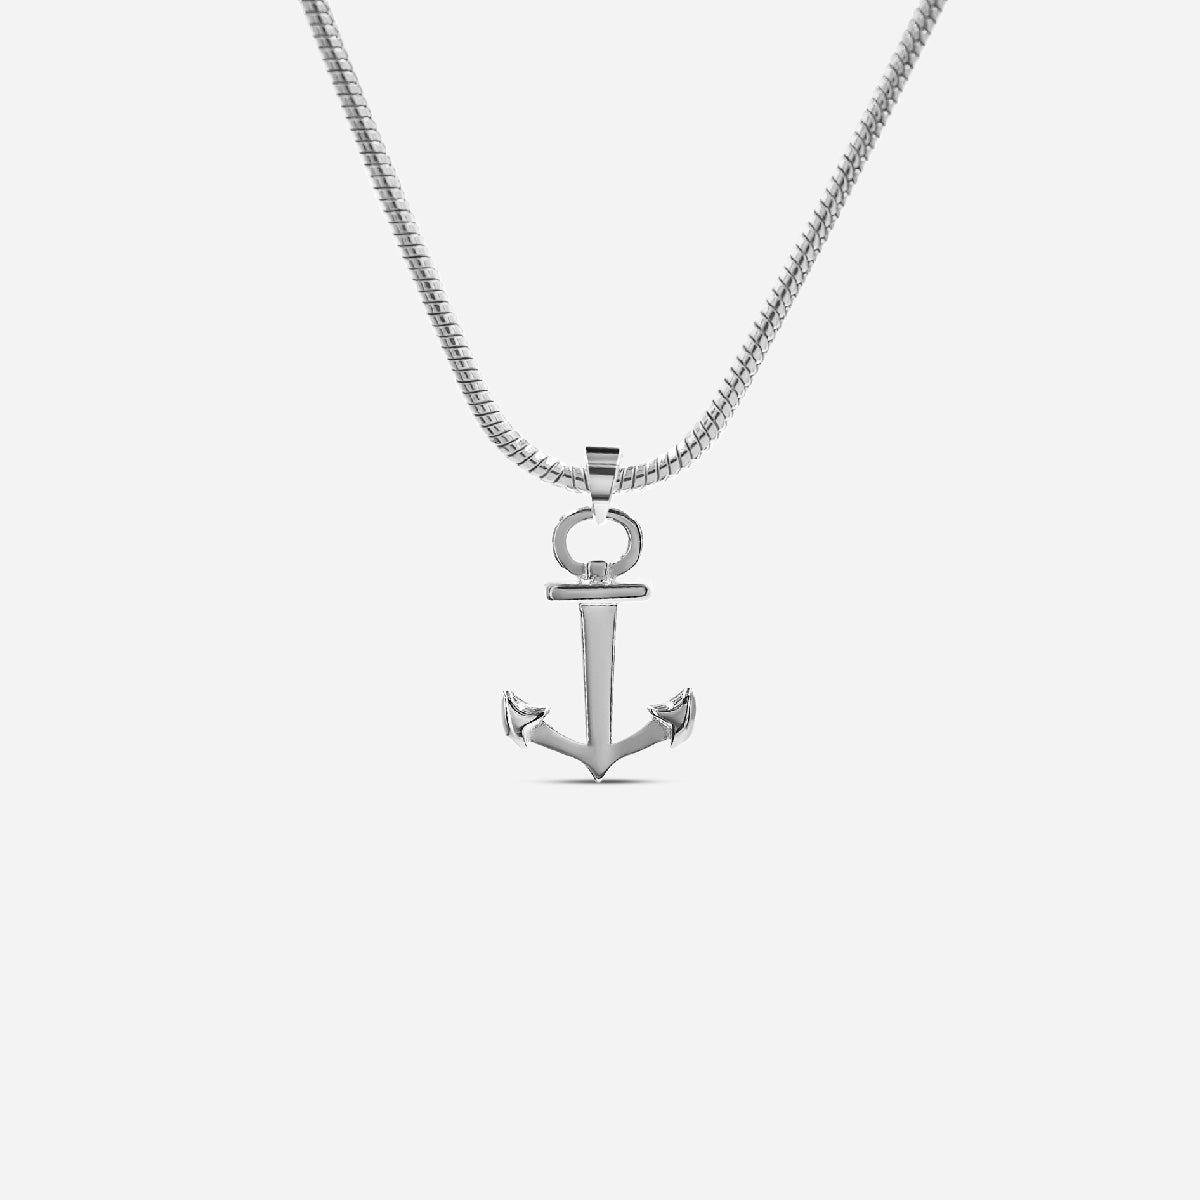 Kids necklace "Anchor" - silver